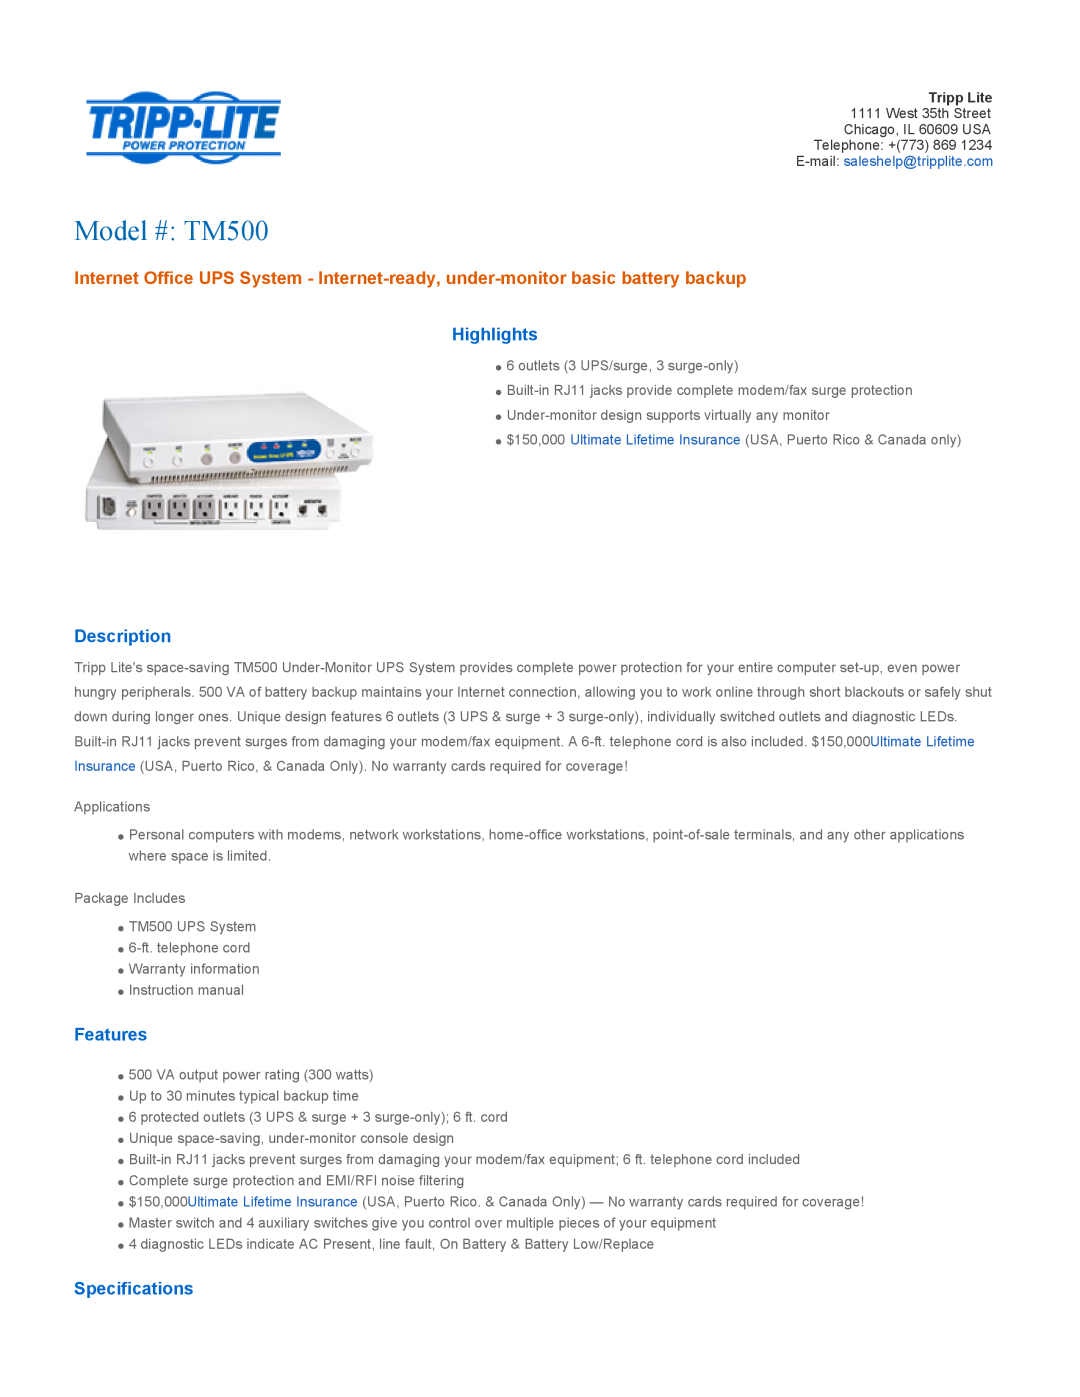 Tripp Lite specifications Highlights, Description, Features, Specifications, Model # TM500 